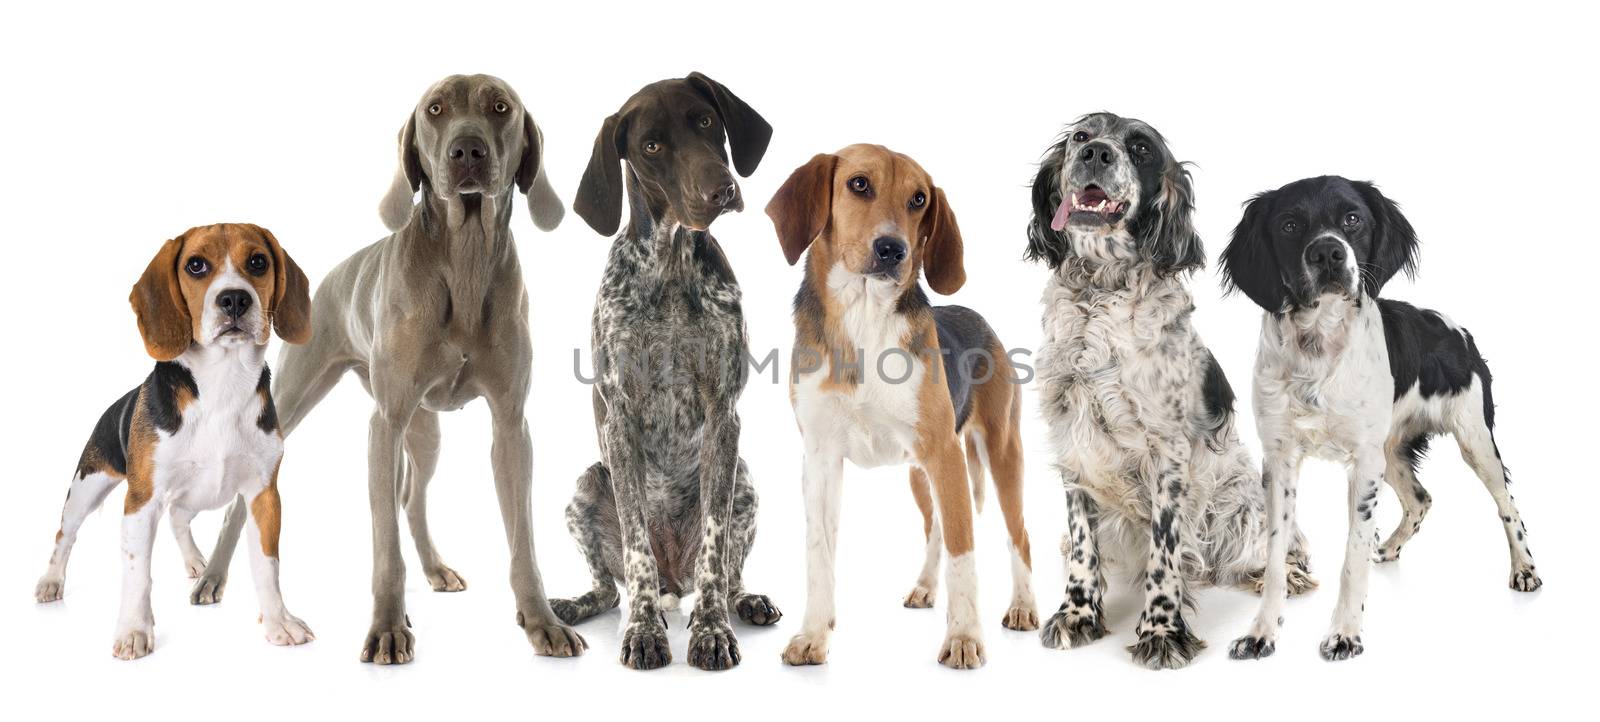 hunting dogs in front of white background